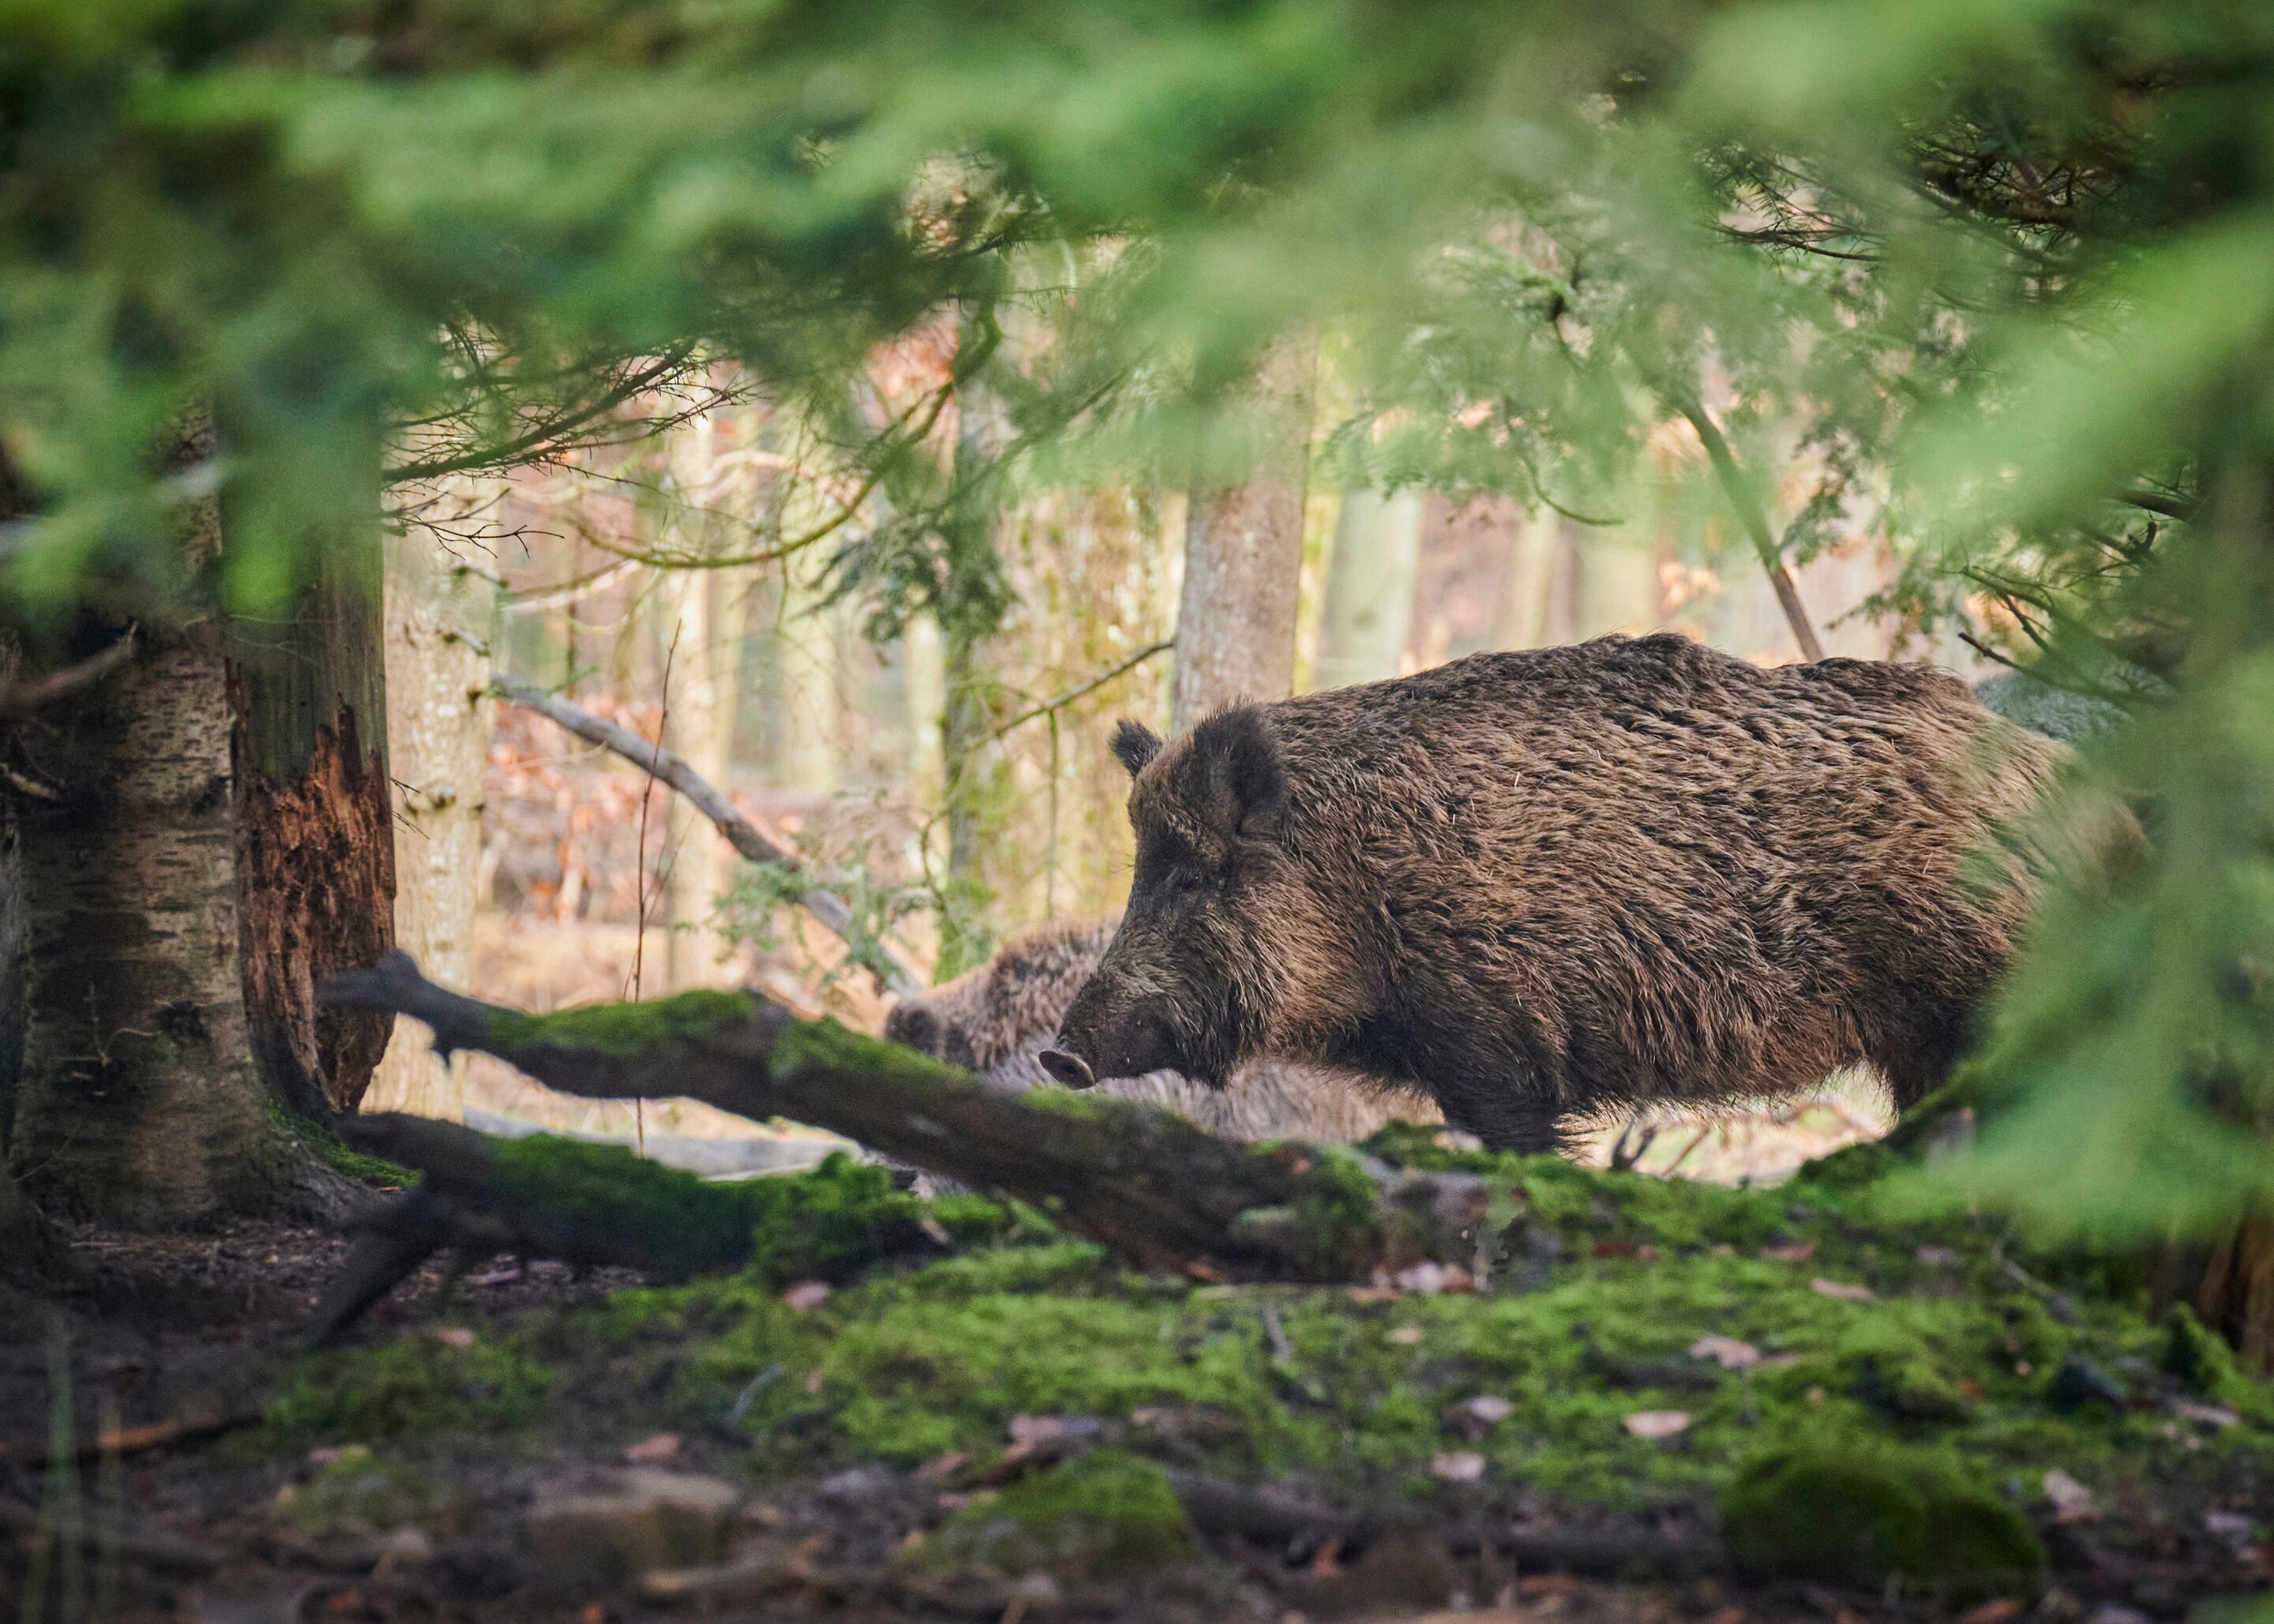 National park wild boar contain five-times more toxic PFAS than humans allowed to eat, study finds